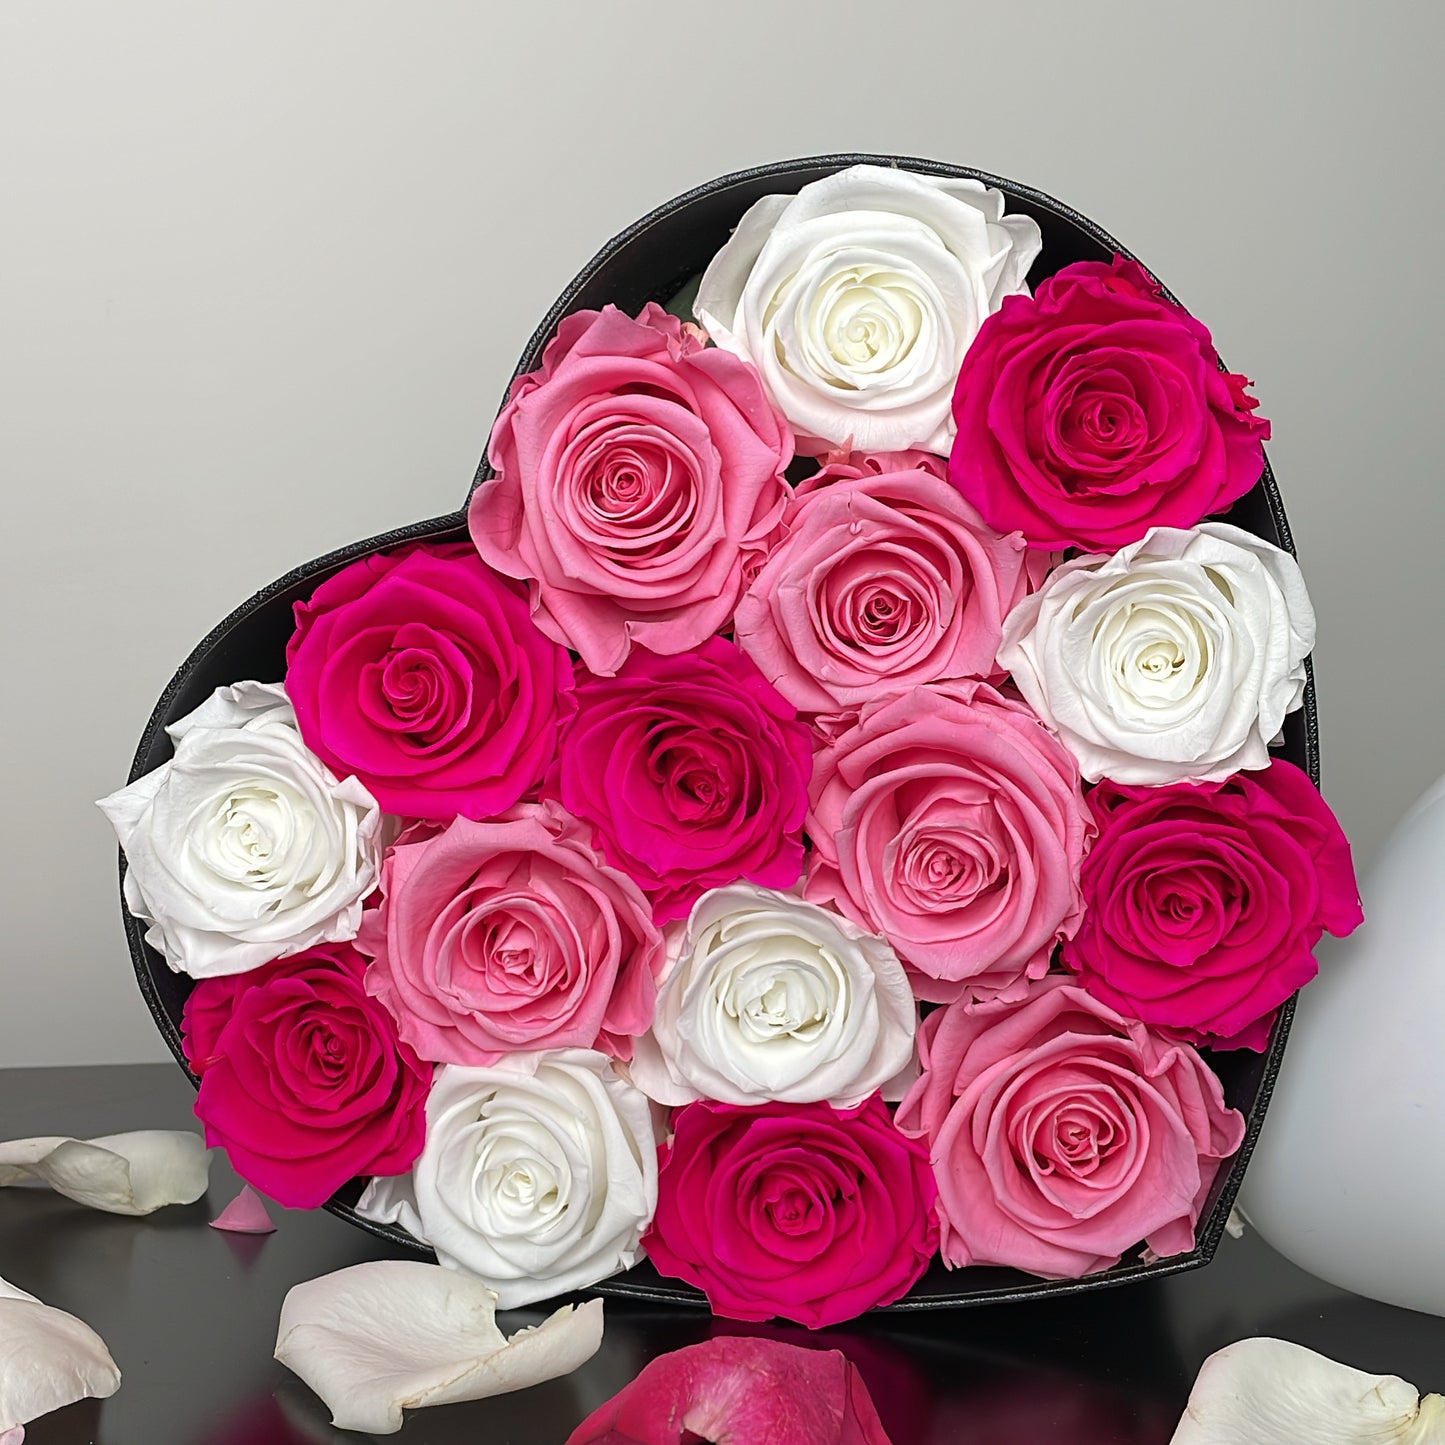 VALENTINE'S HEART BOX - PRESERVED ROSES WITH BALLOON